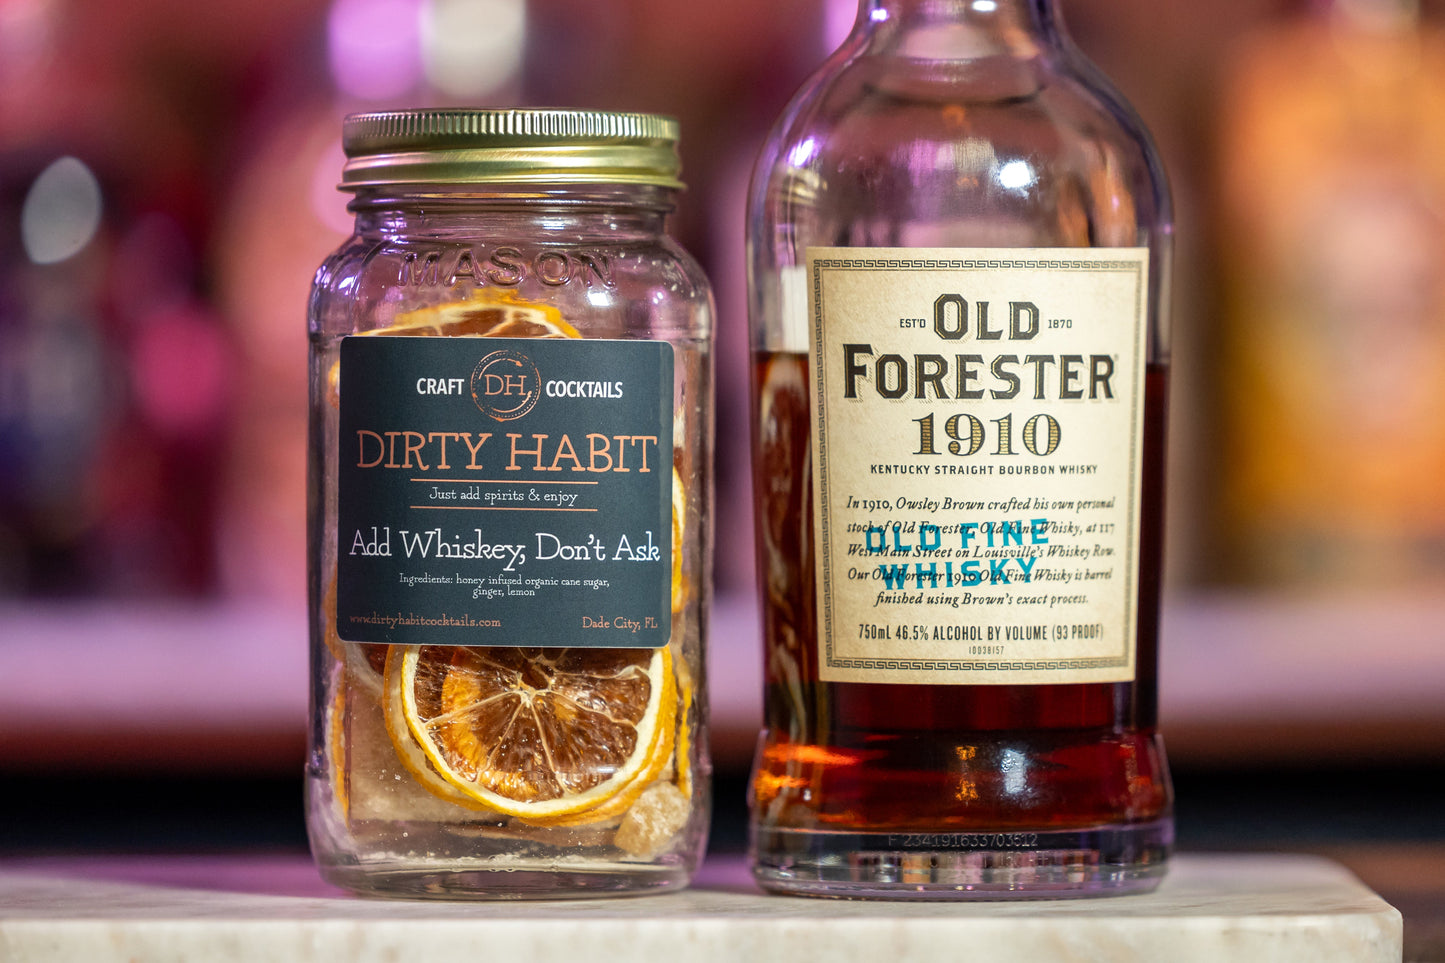 Add Whiskey, Don't Ask by Dirty Habit Cocktails